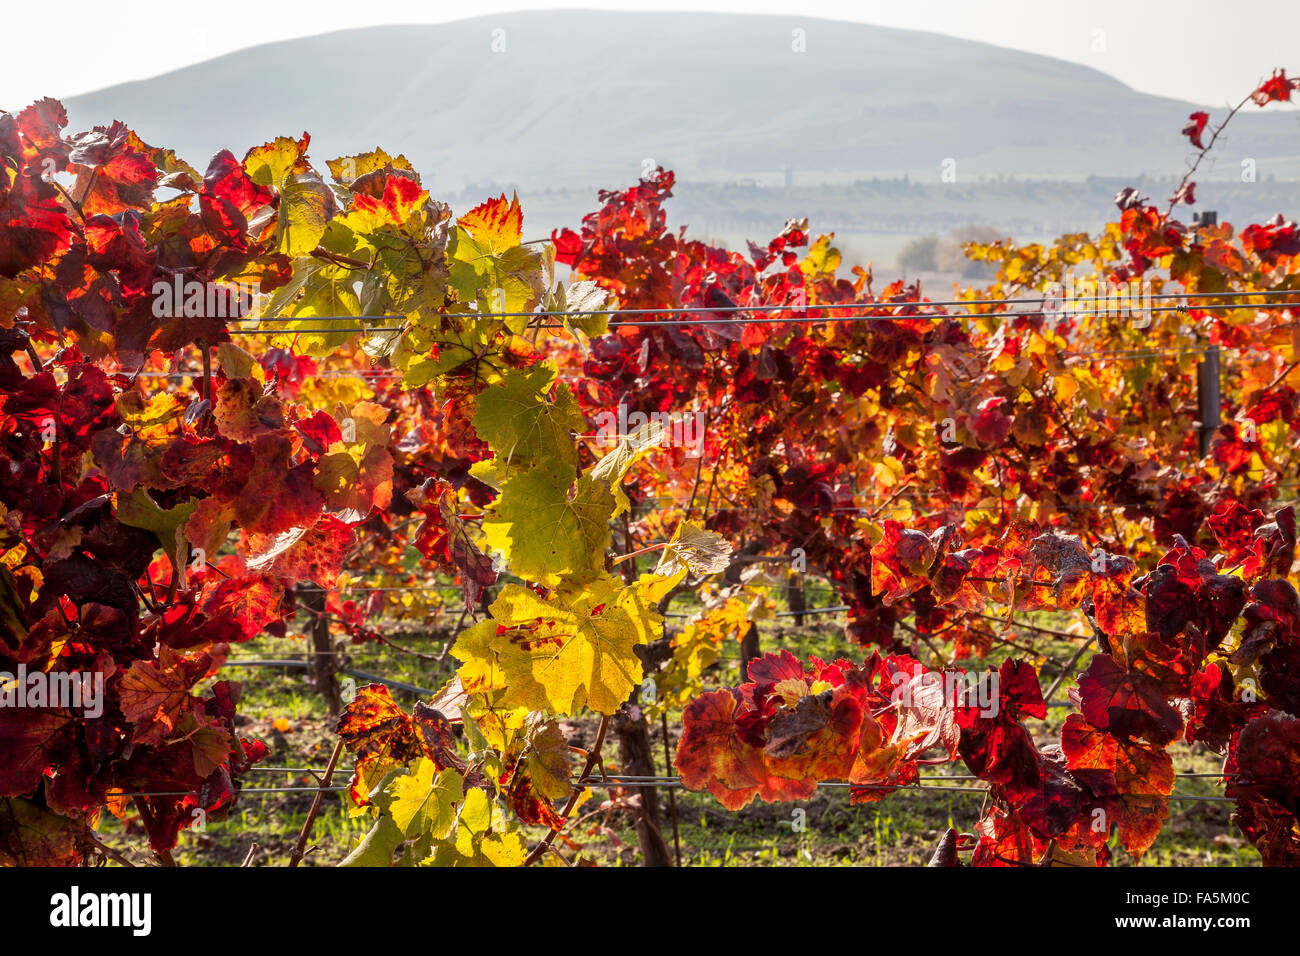 Grapevines in Autumn at Ram's Gate Winery and Vineyards, Sonoma, California, USA Stock Photo